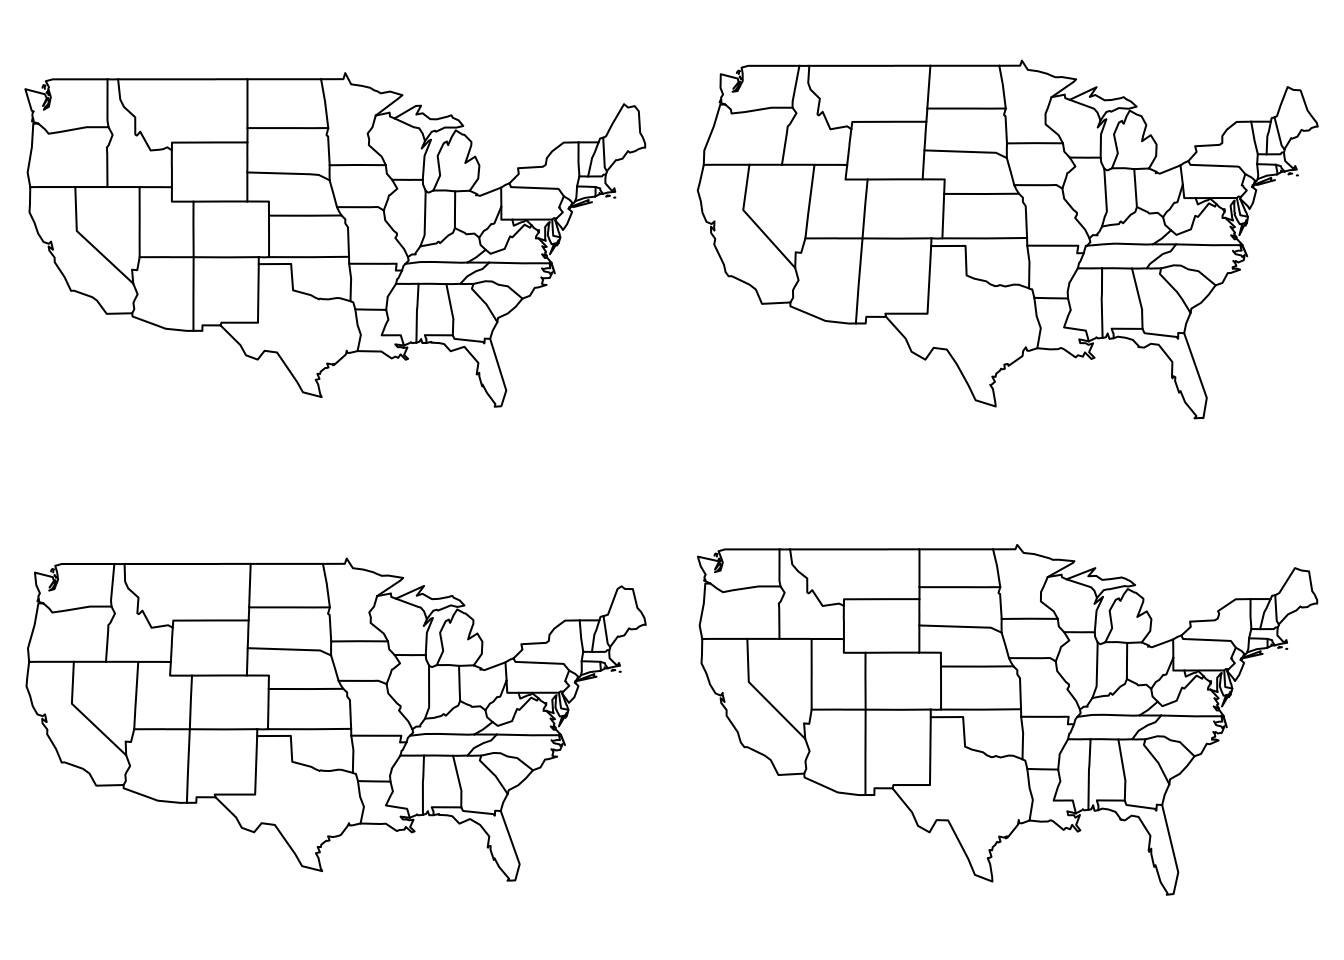 Mercator, Mollweide, and Gilbert equatorial projections along with a cylequalarea projection centered on the middle of the US.